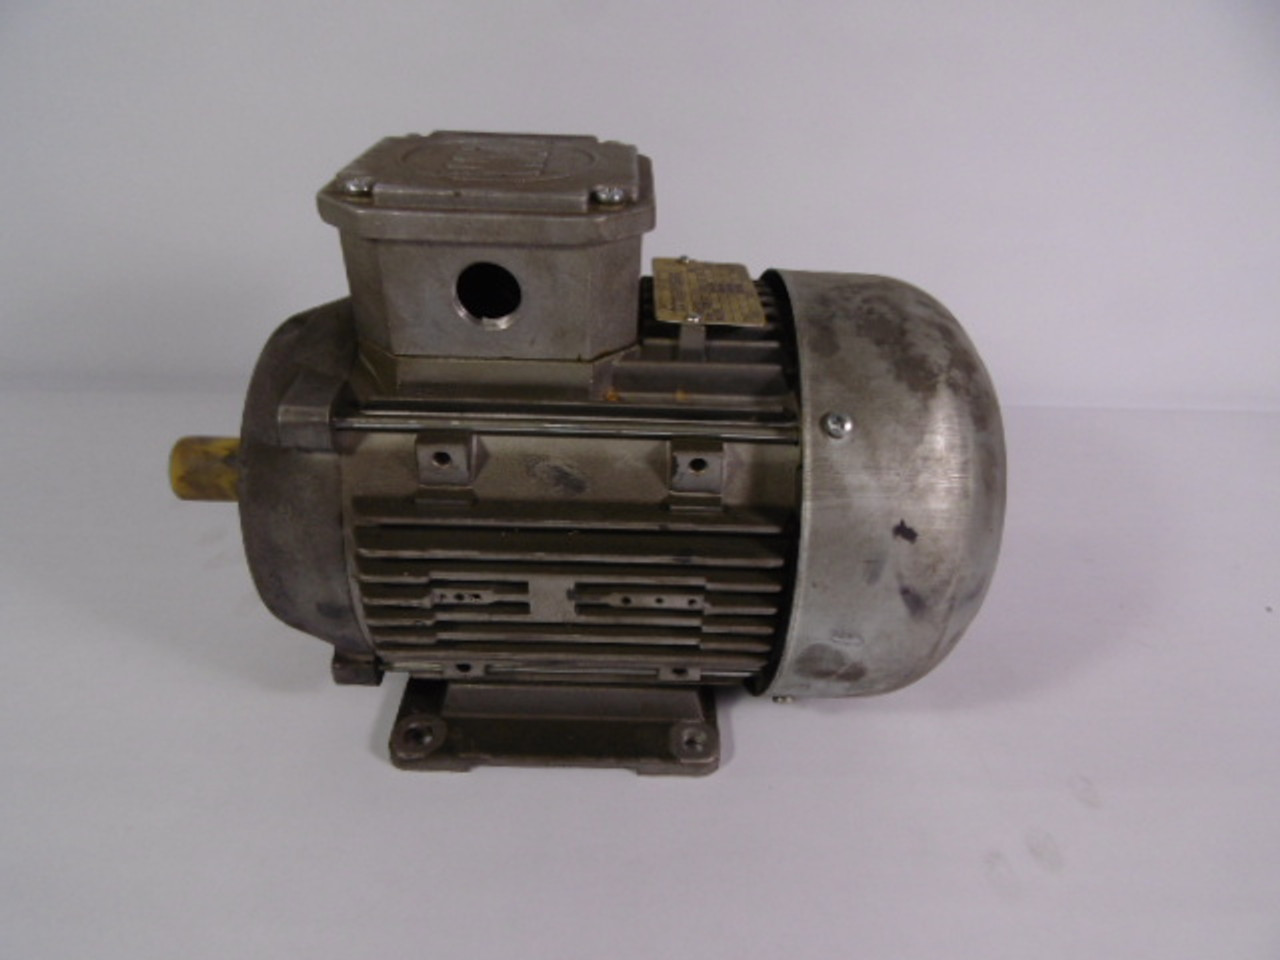 Ermaksan 0.75kW 1680RPM 220-265/380-460V TEFC 3Ph 3.22-3.06A 60Hz USED